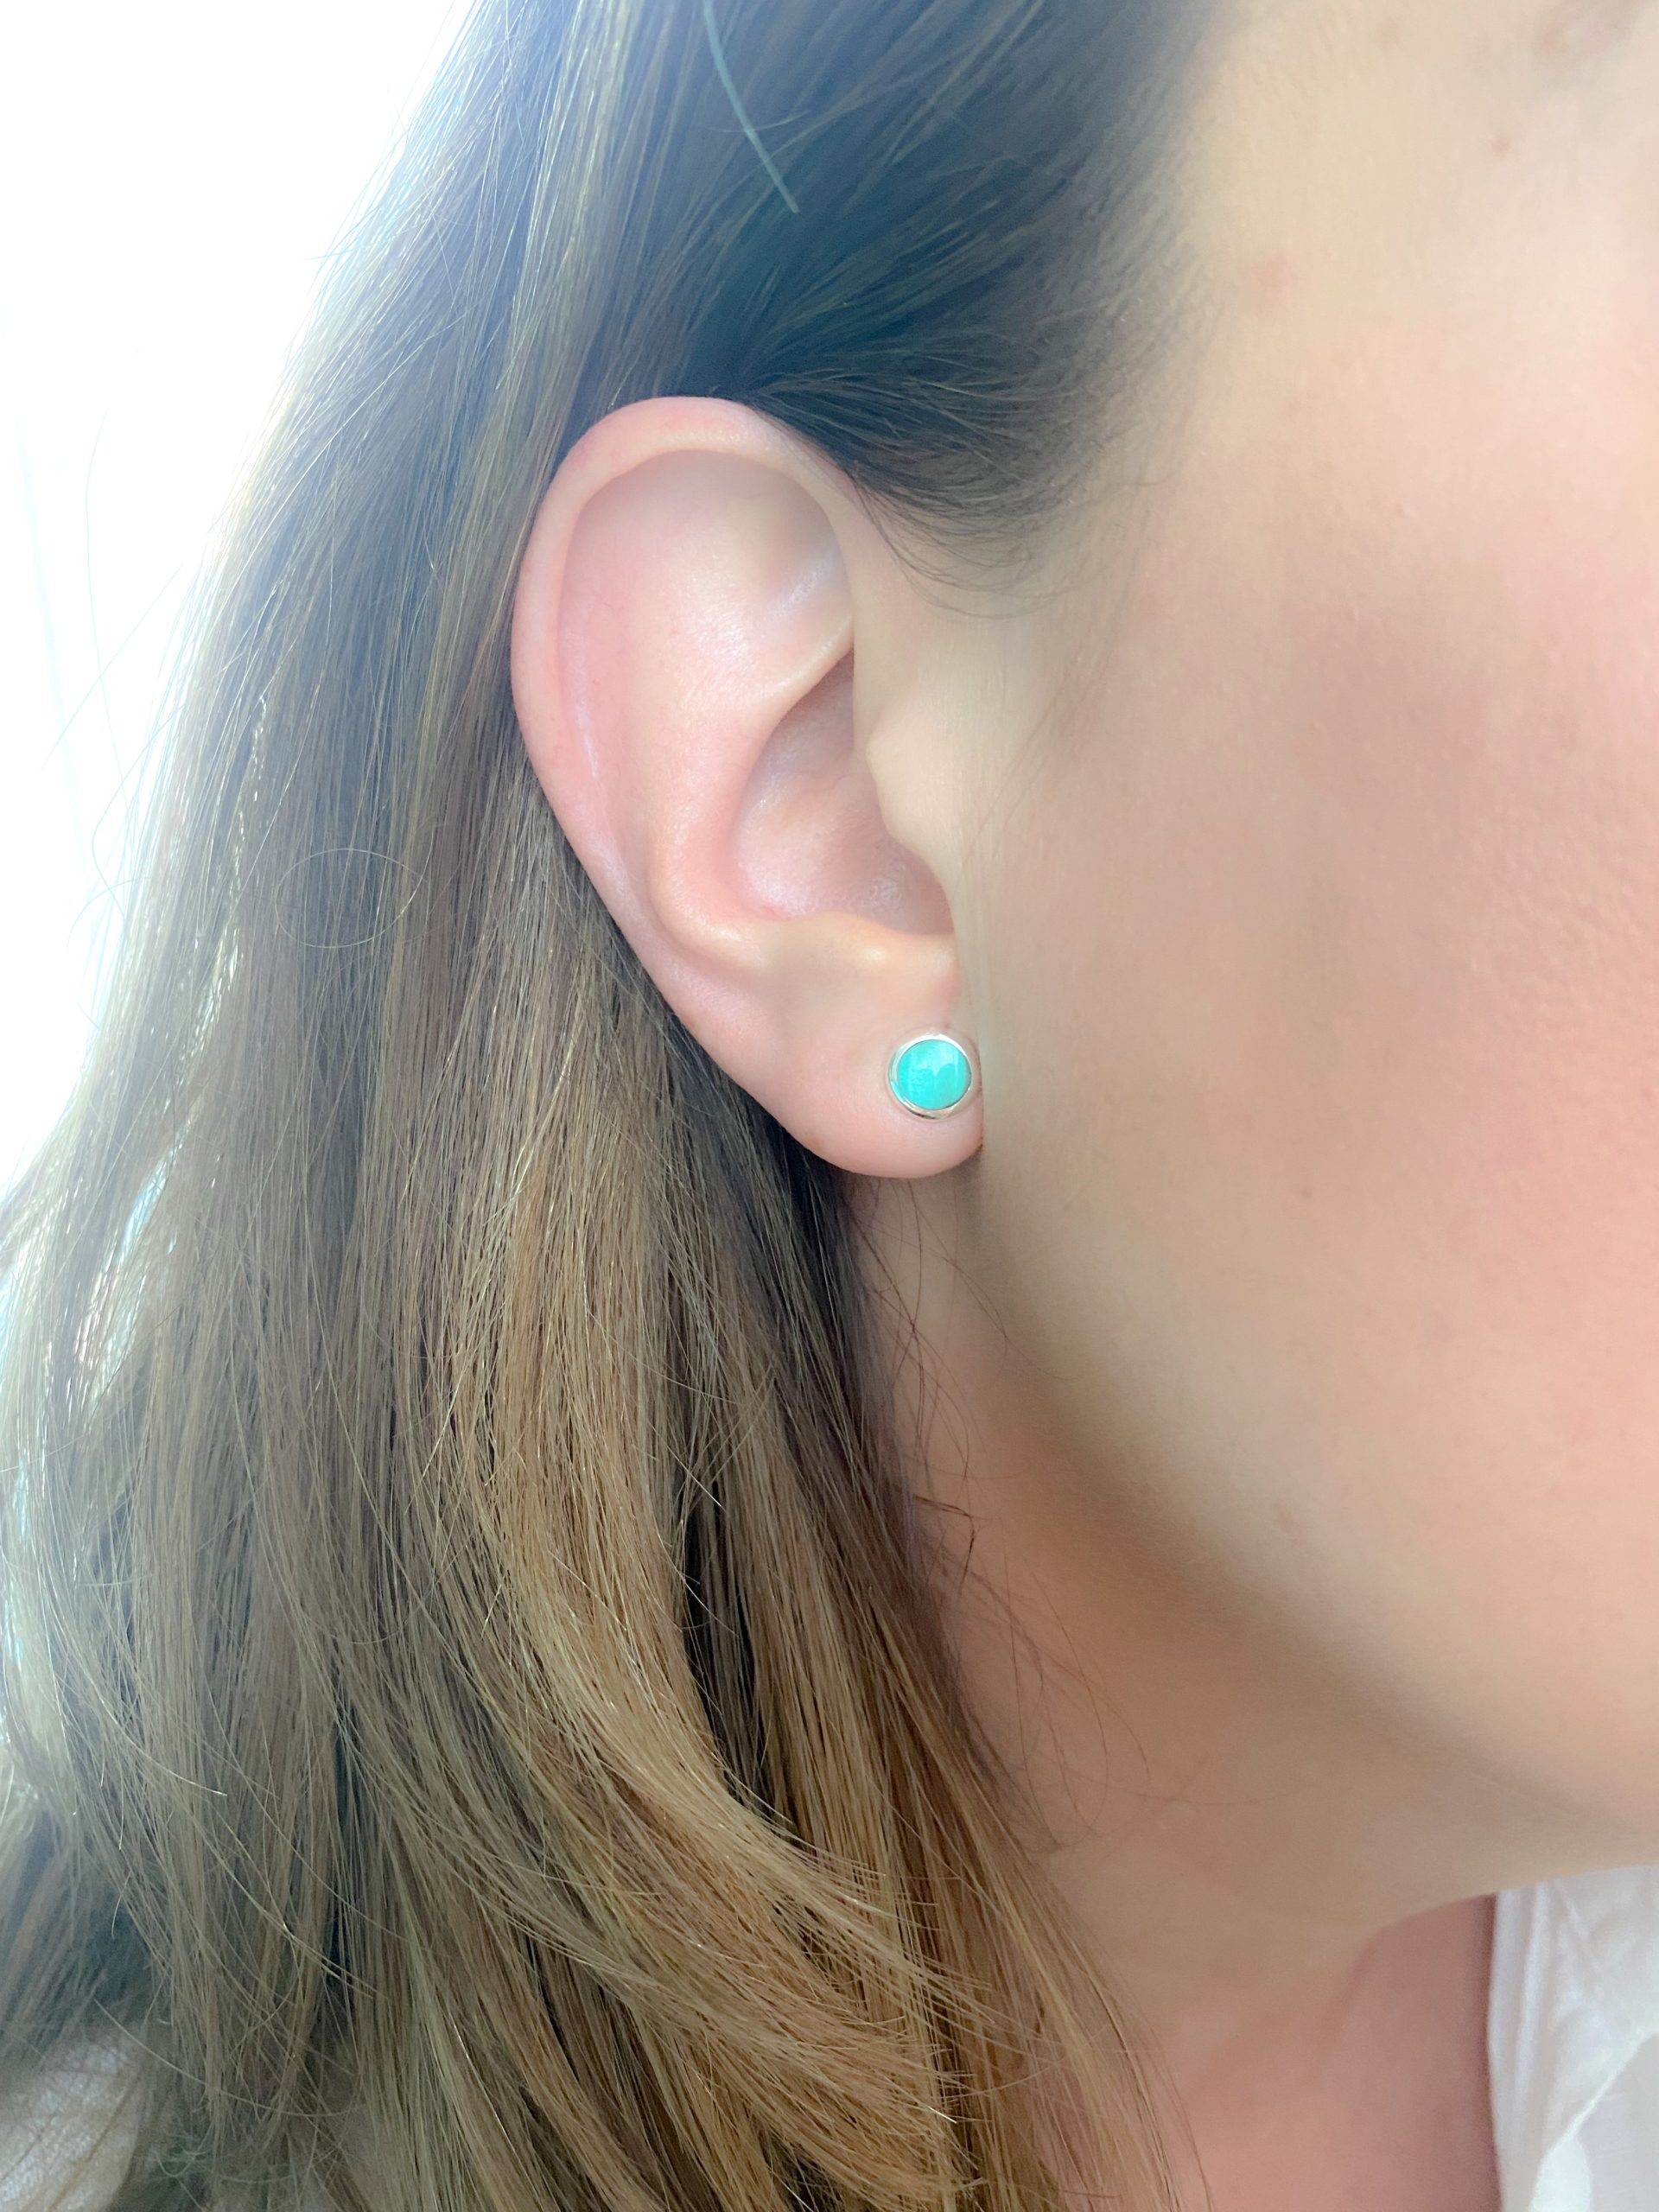 Sterling silver 925 turquoise earrings with bezel 8mm